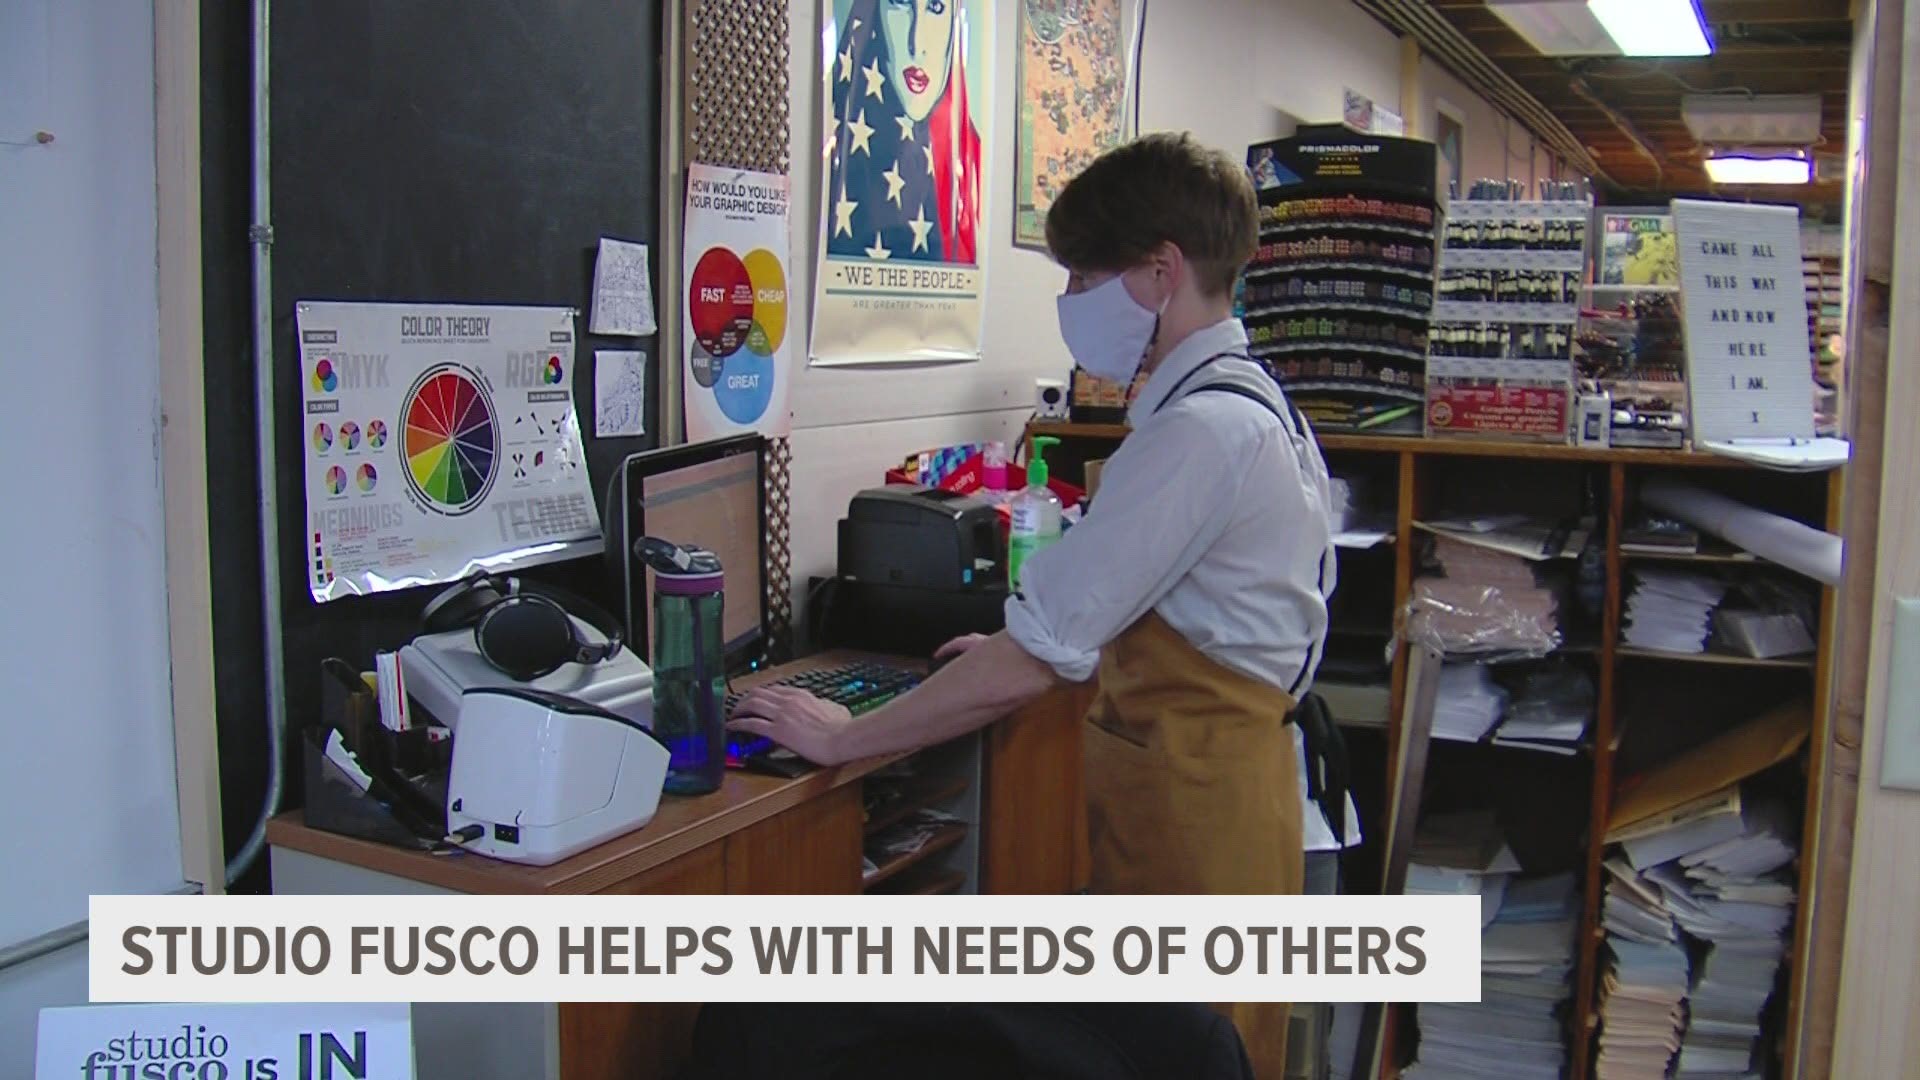 Studio Fusco creates free signs for businesses who need a hand during the pandemic.